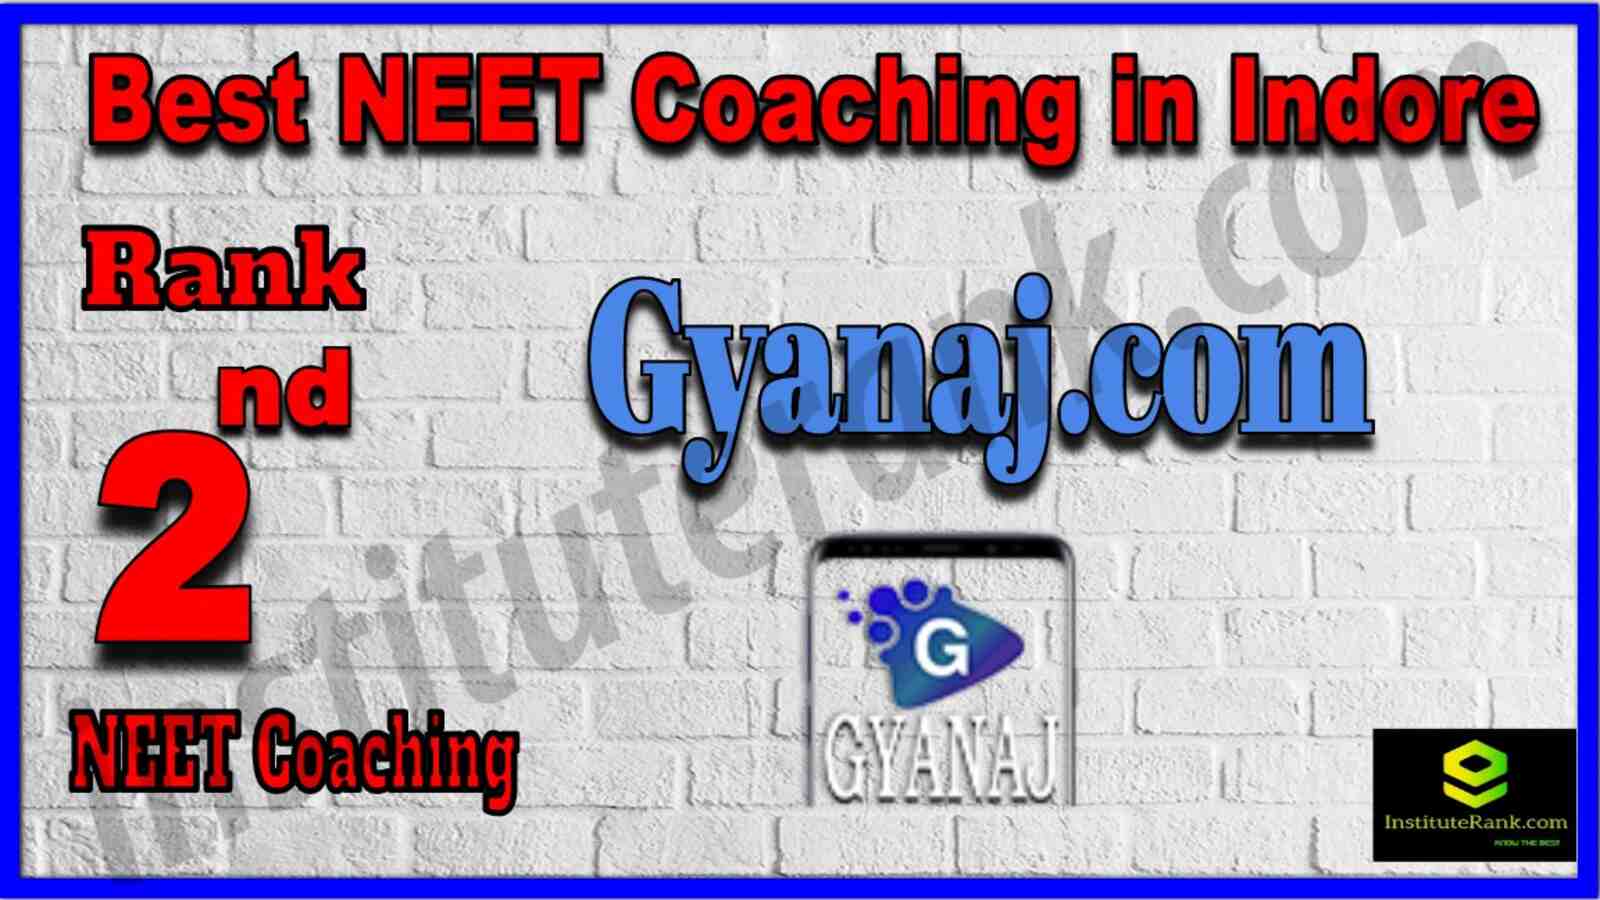 2nd Best NEET Coaching in Indore